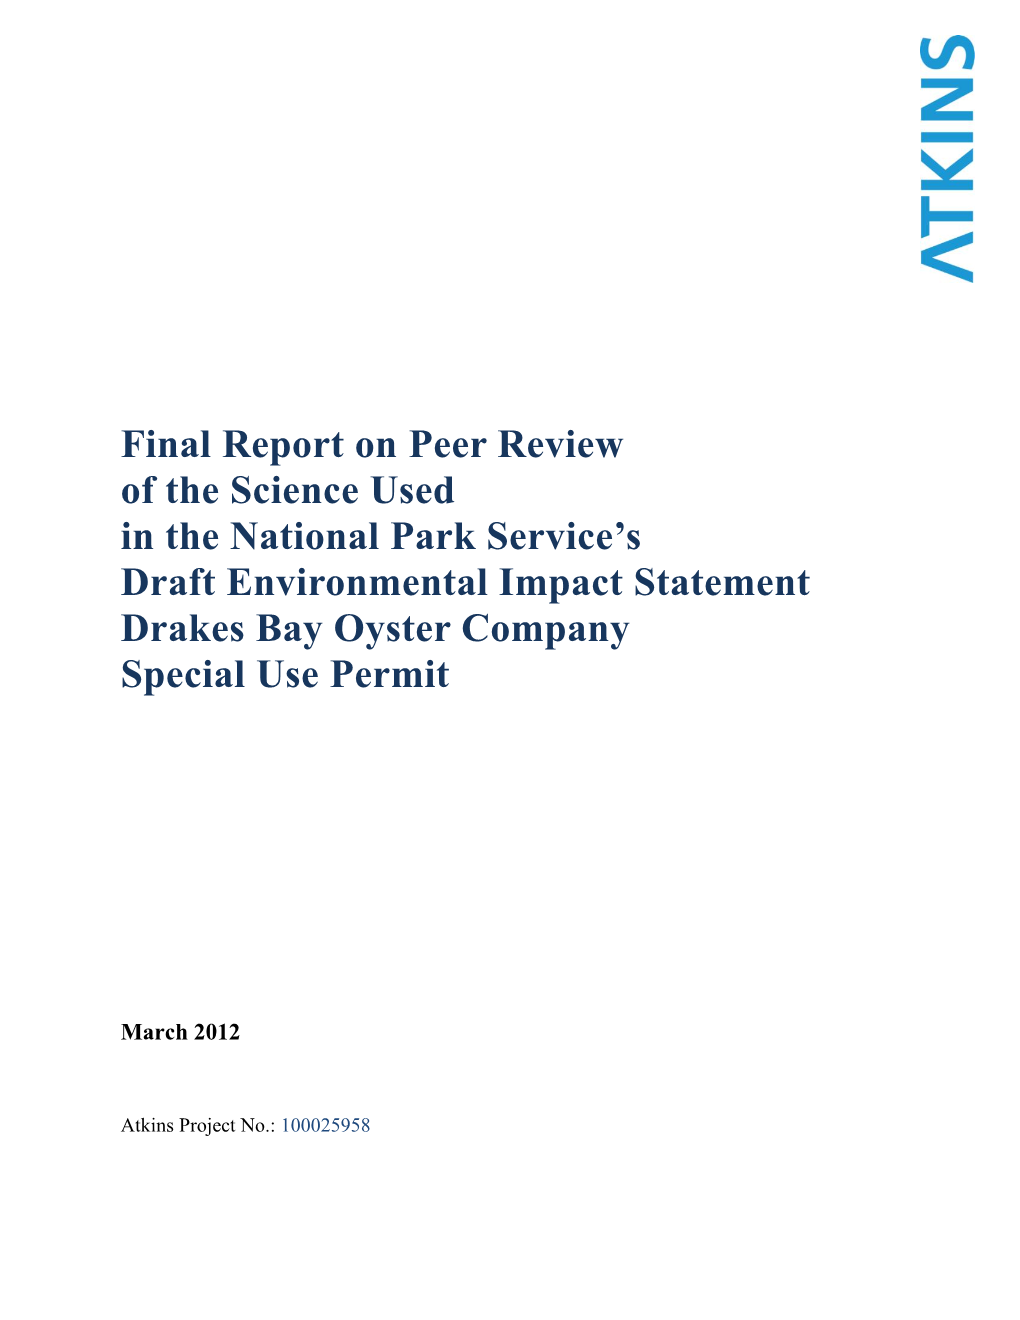 Final Report on Peer Review of the Science Used in the National Park Service’S Draft Environmental Impact Statement Drakes Bay Oyster Company Special Use Permit